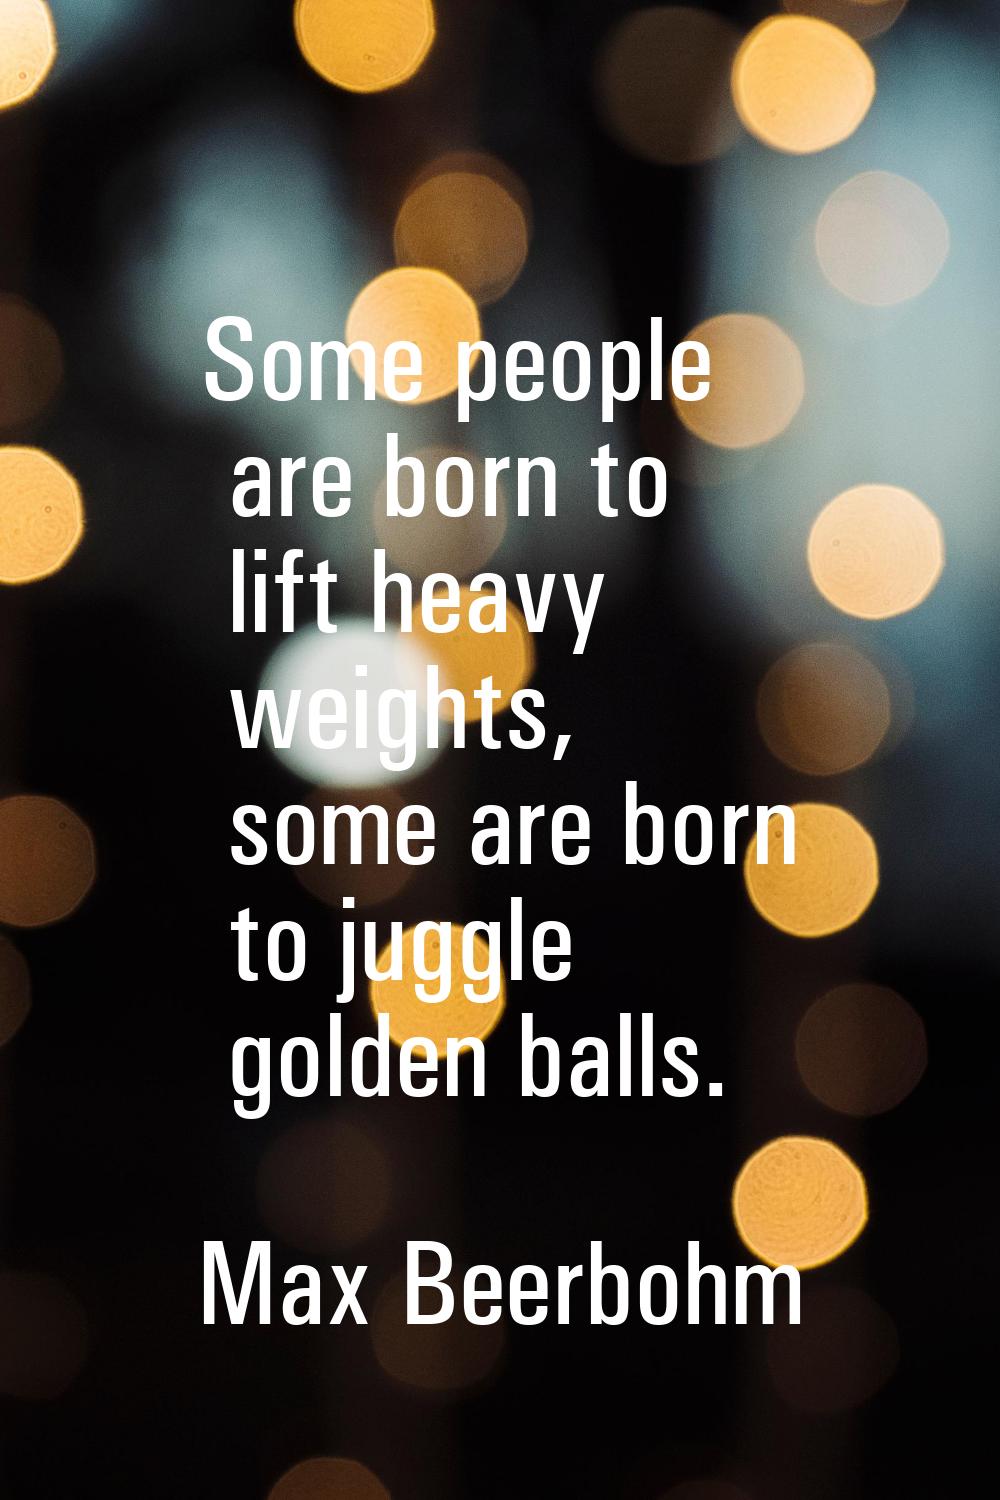 Some people are born to lift heavy weights, some are born to juggle golden balls.